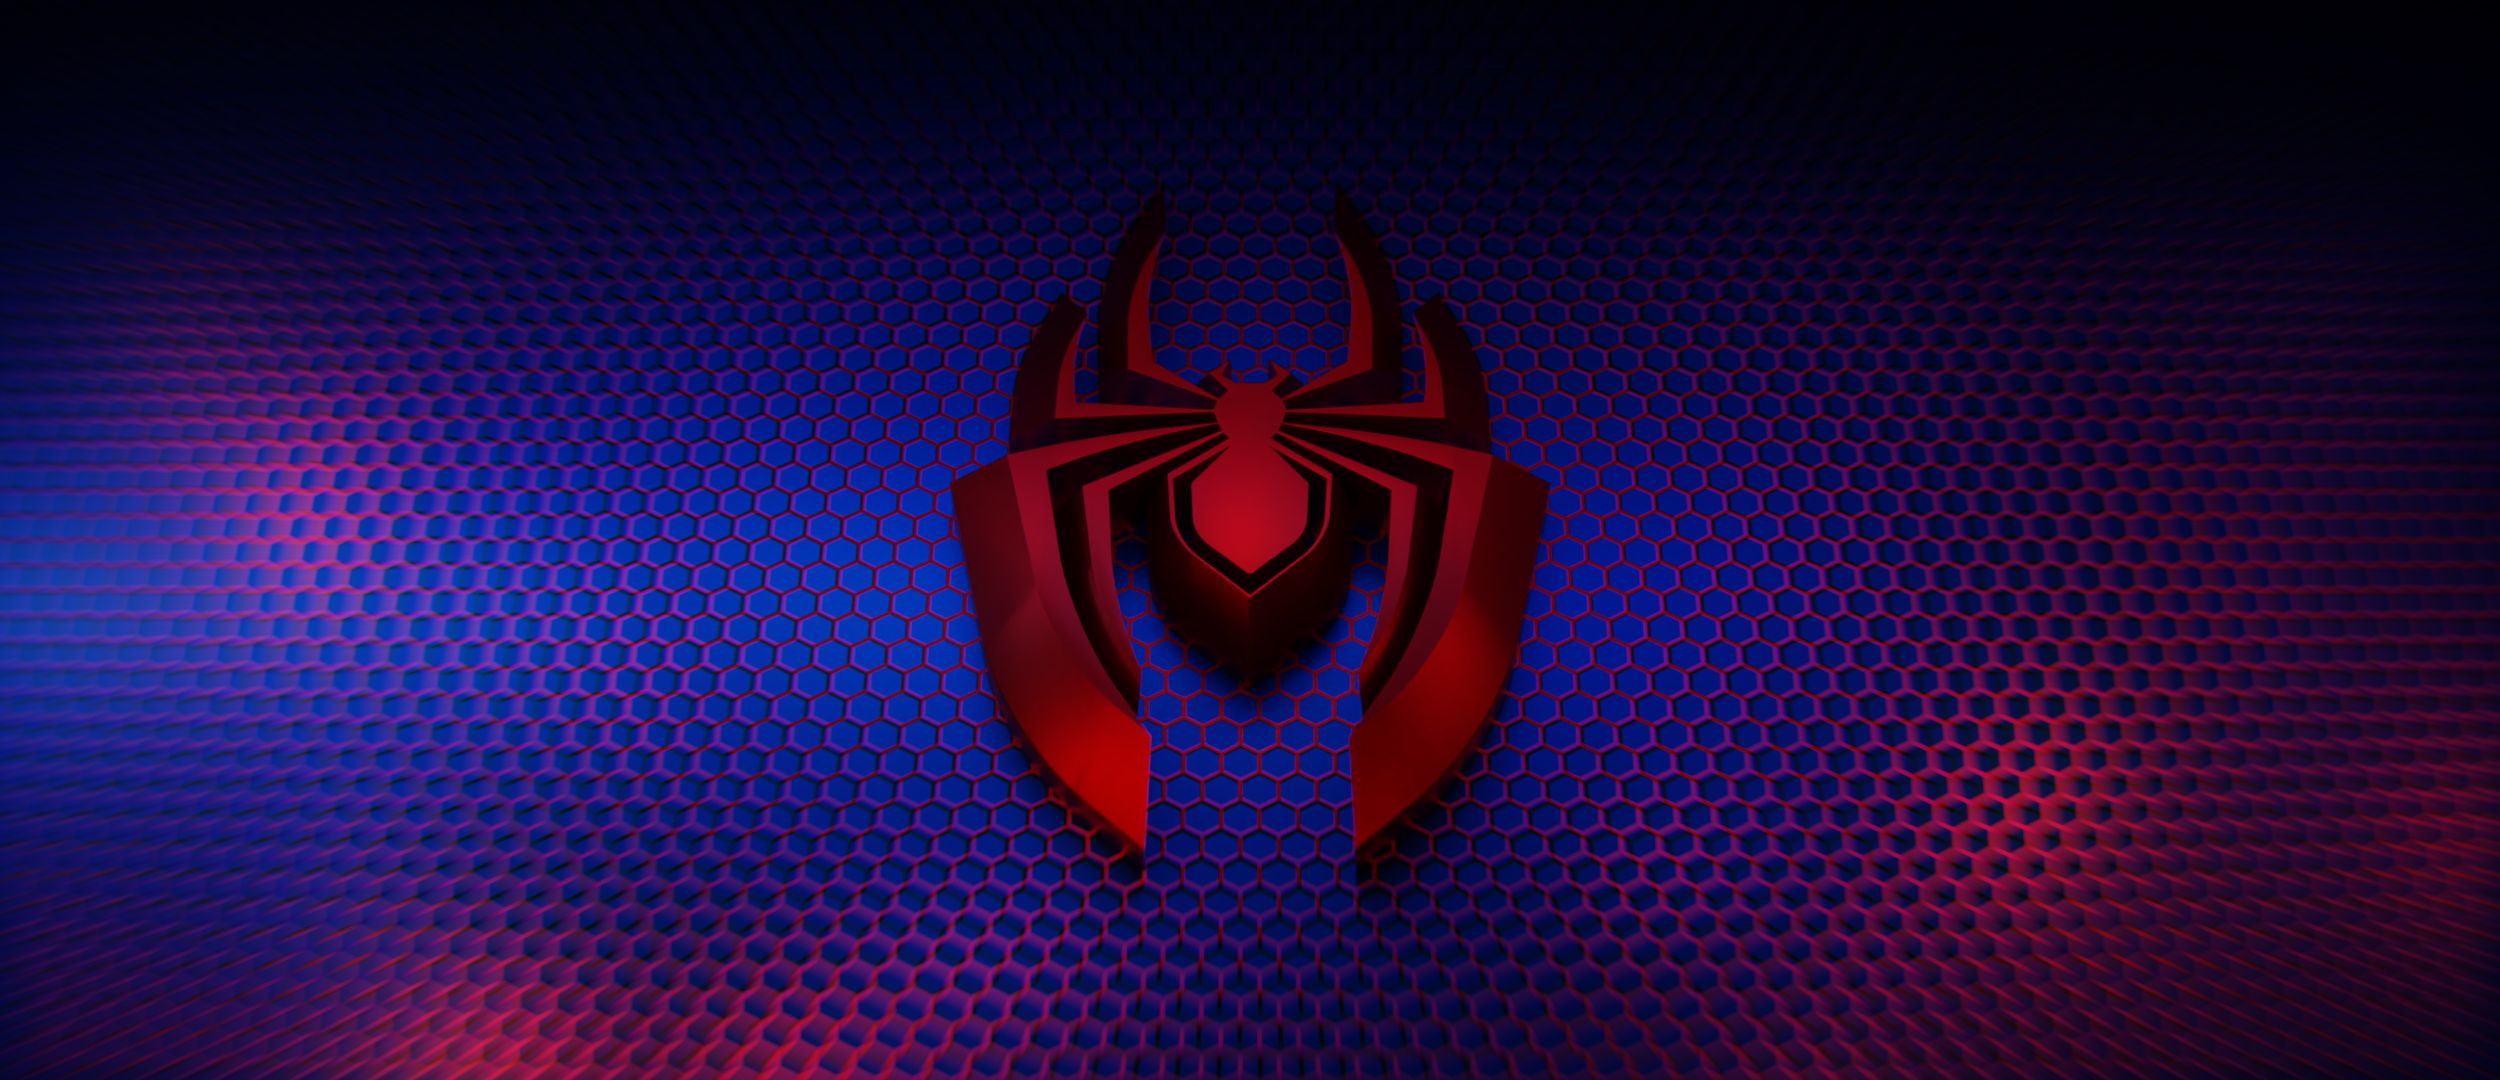 Spider Man Logo wallpapers for desktop, download free Spider Man Logo  pictures and backgrounds for PC 